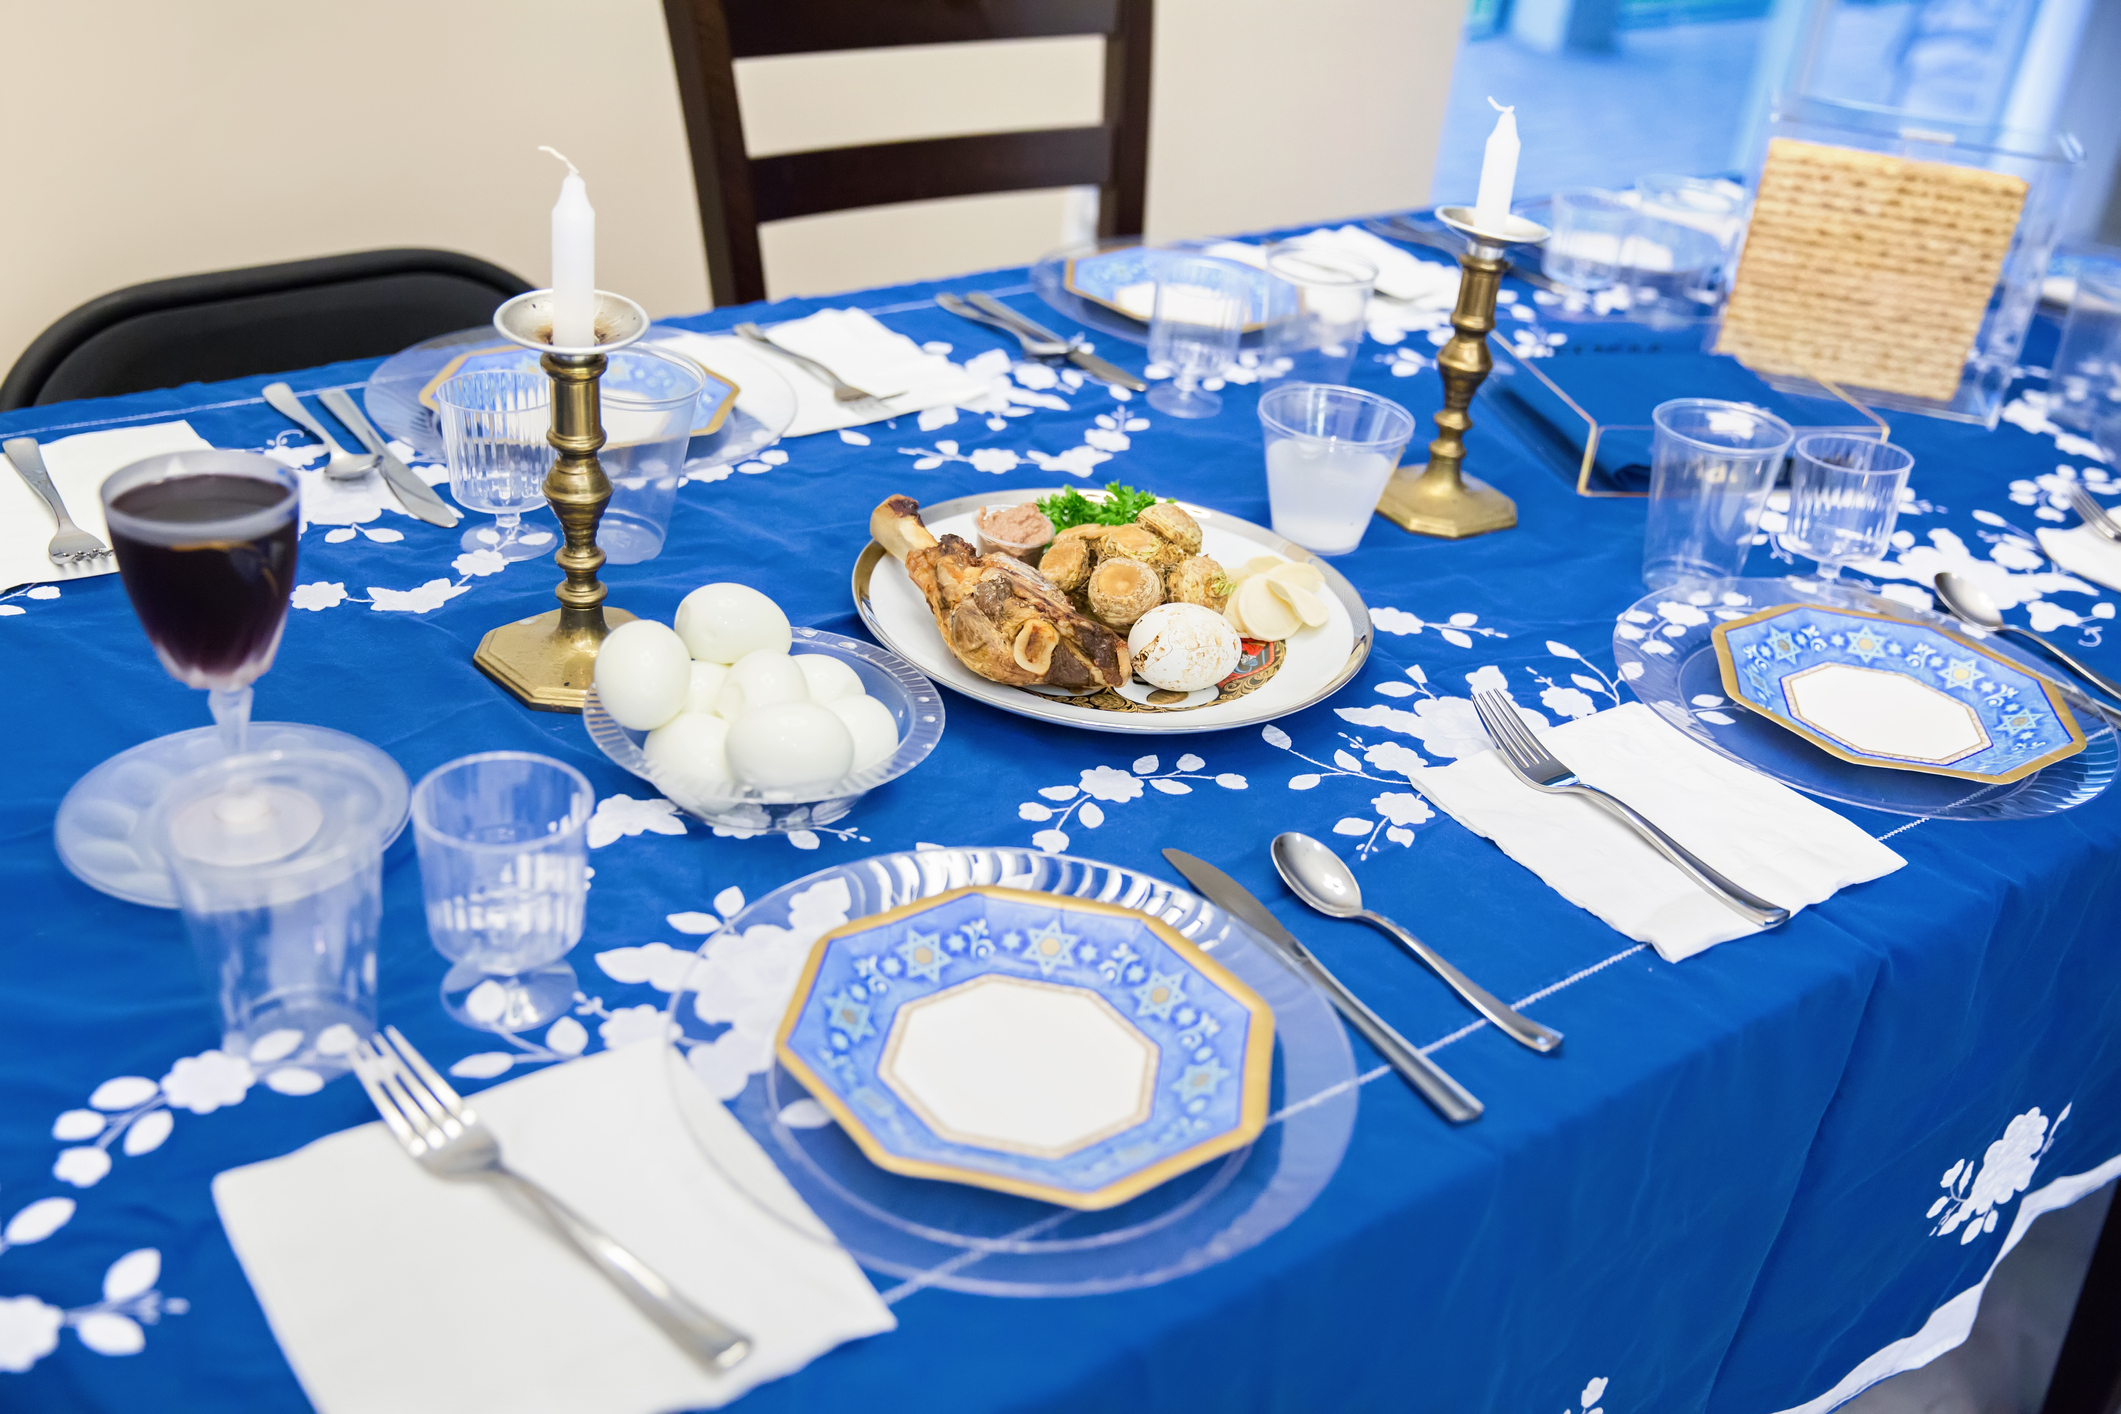 Who's going to invite me for Seder in Israel? The Jewish Chronicle